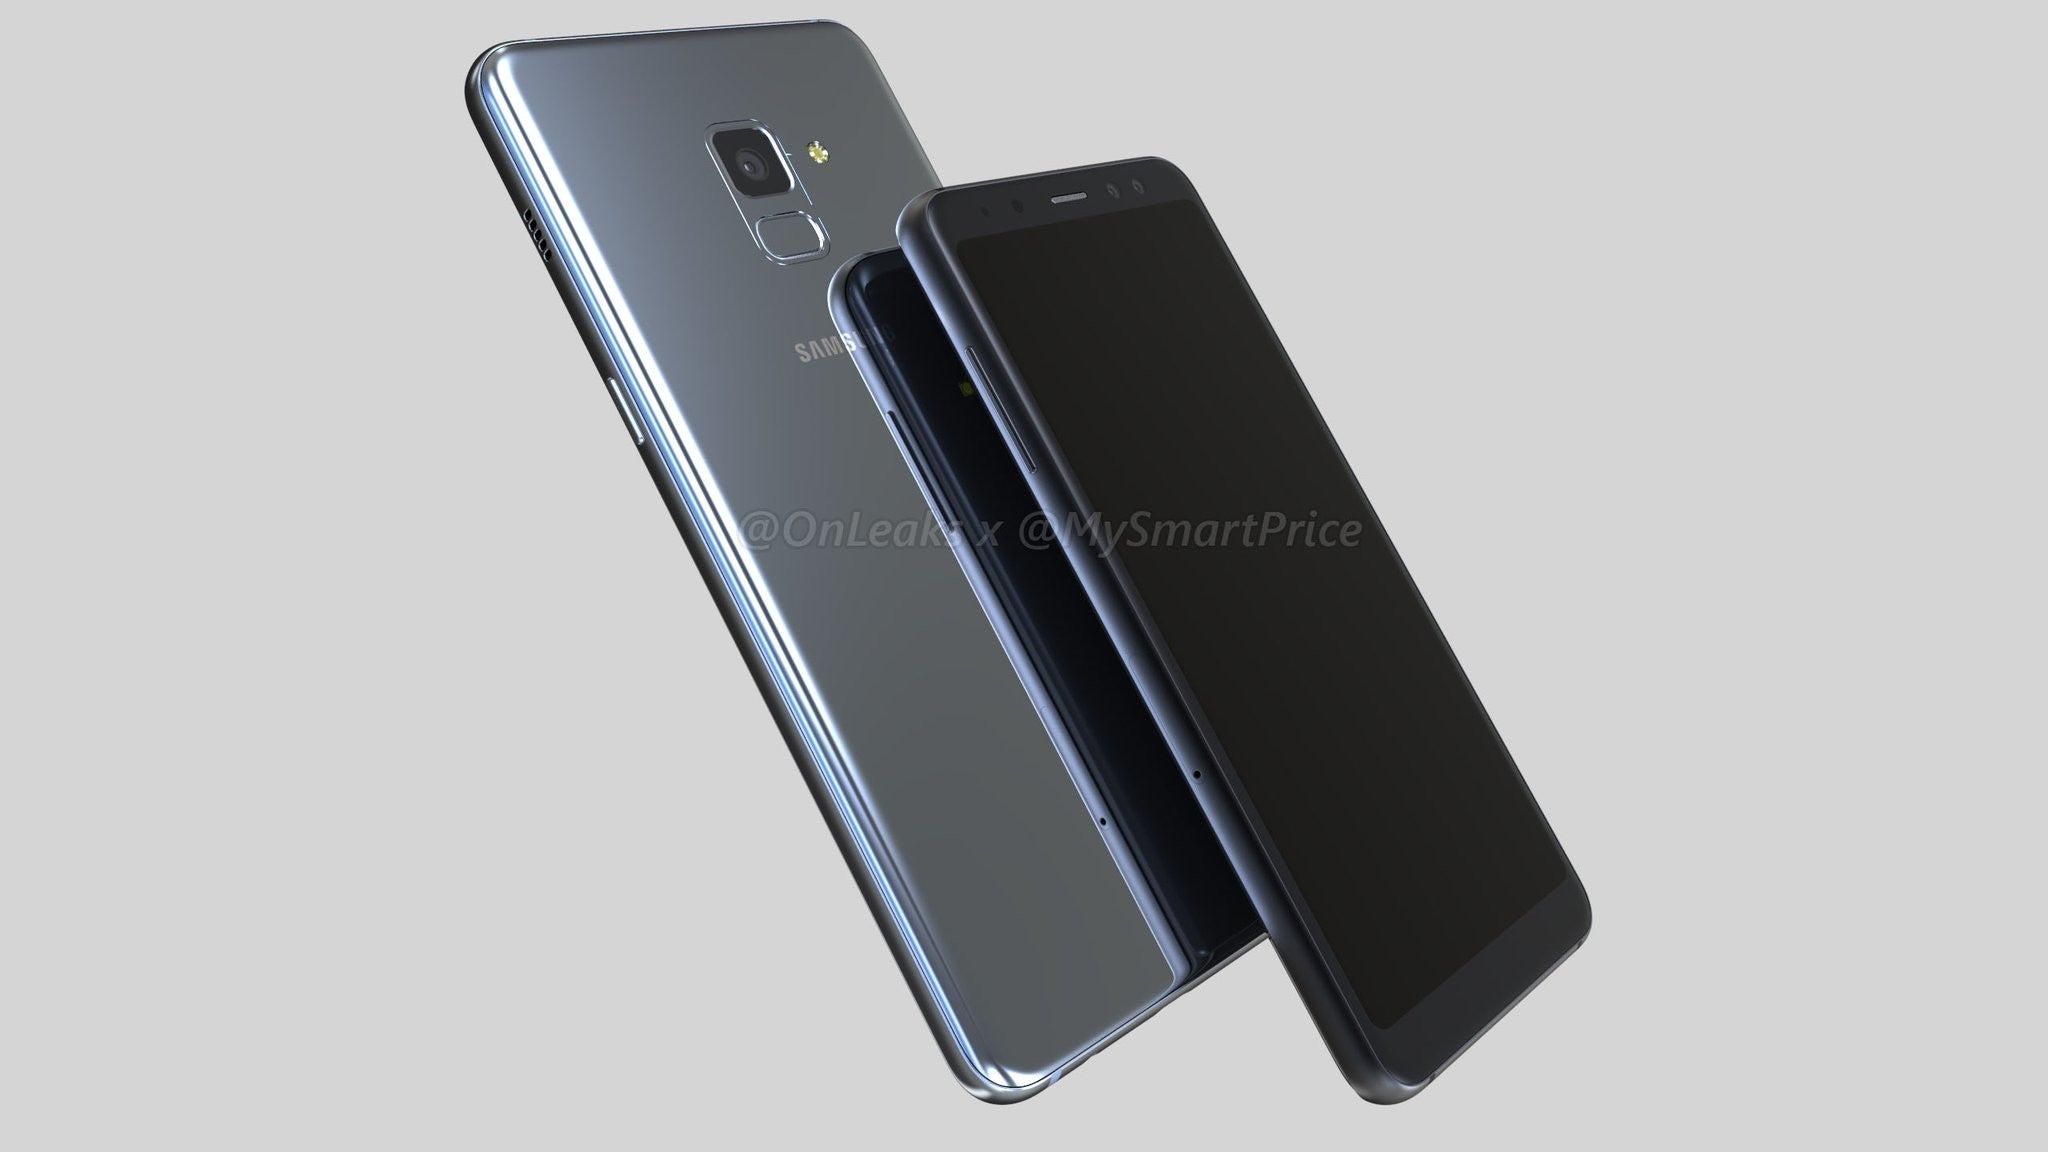 Samsung Galaxy A5 (2018) and A7 (2018) appear in tons of new renders